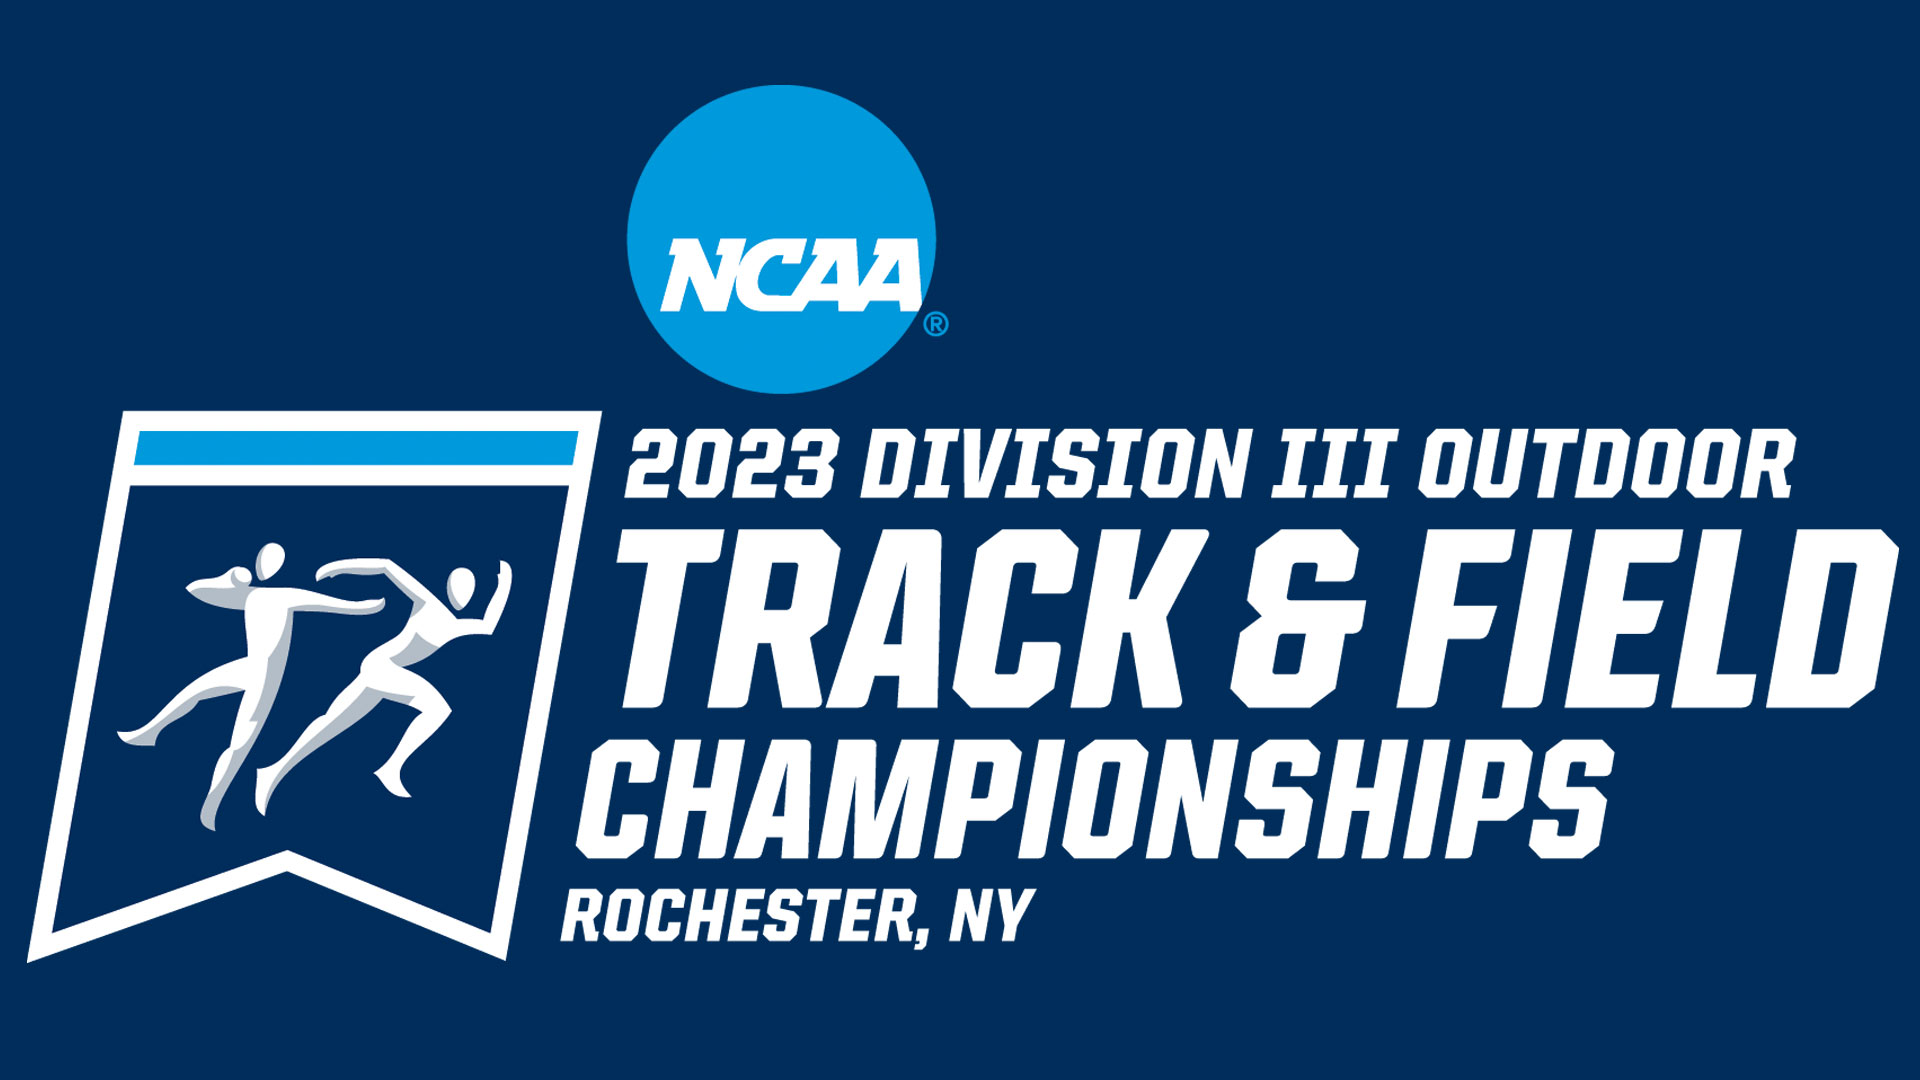 Seven Tartans to Compete at NCAA Outdoor Track and Field Championships